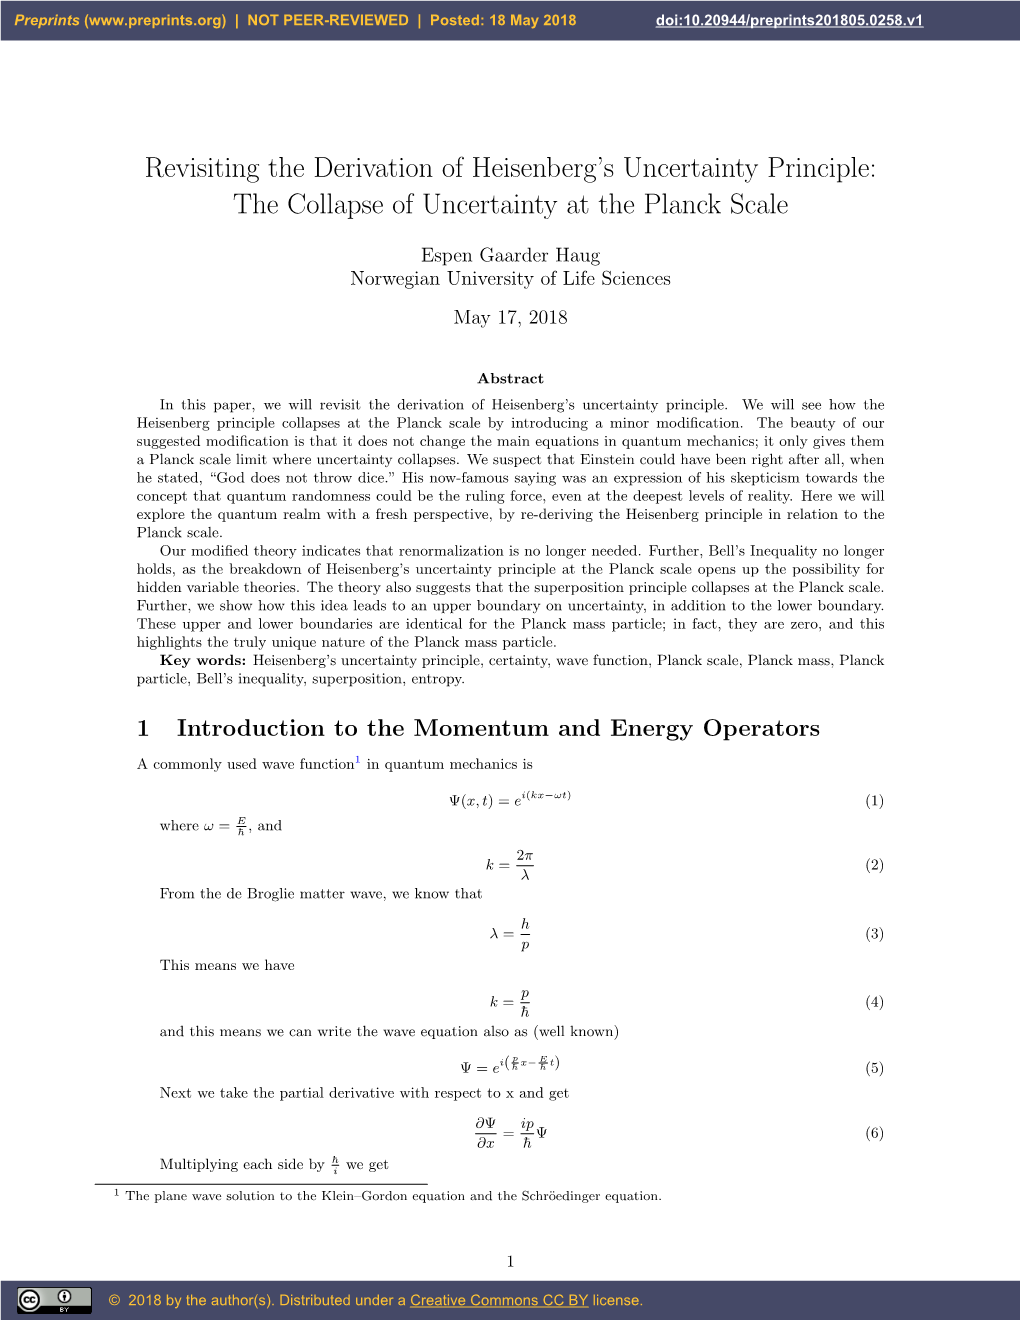 Revisiting the Derivation of Heisenberg's Uncertainty Principle